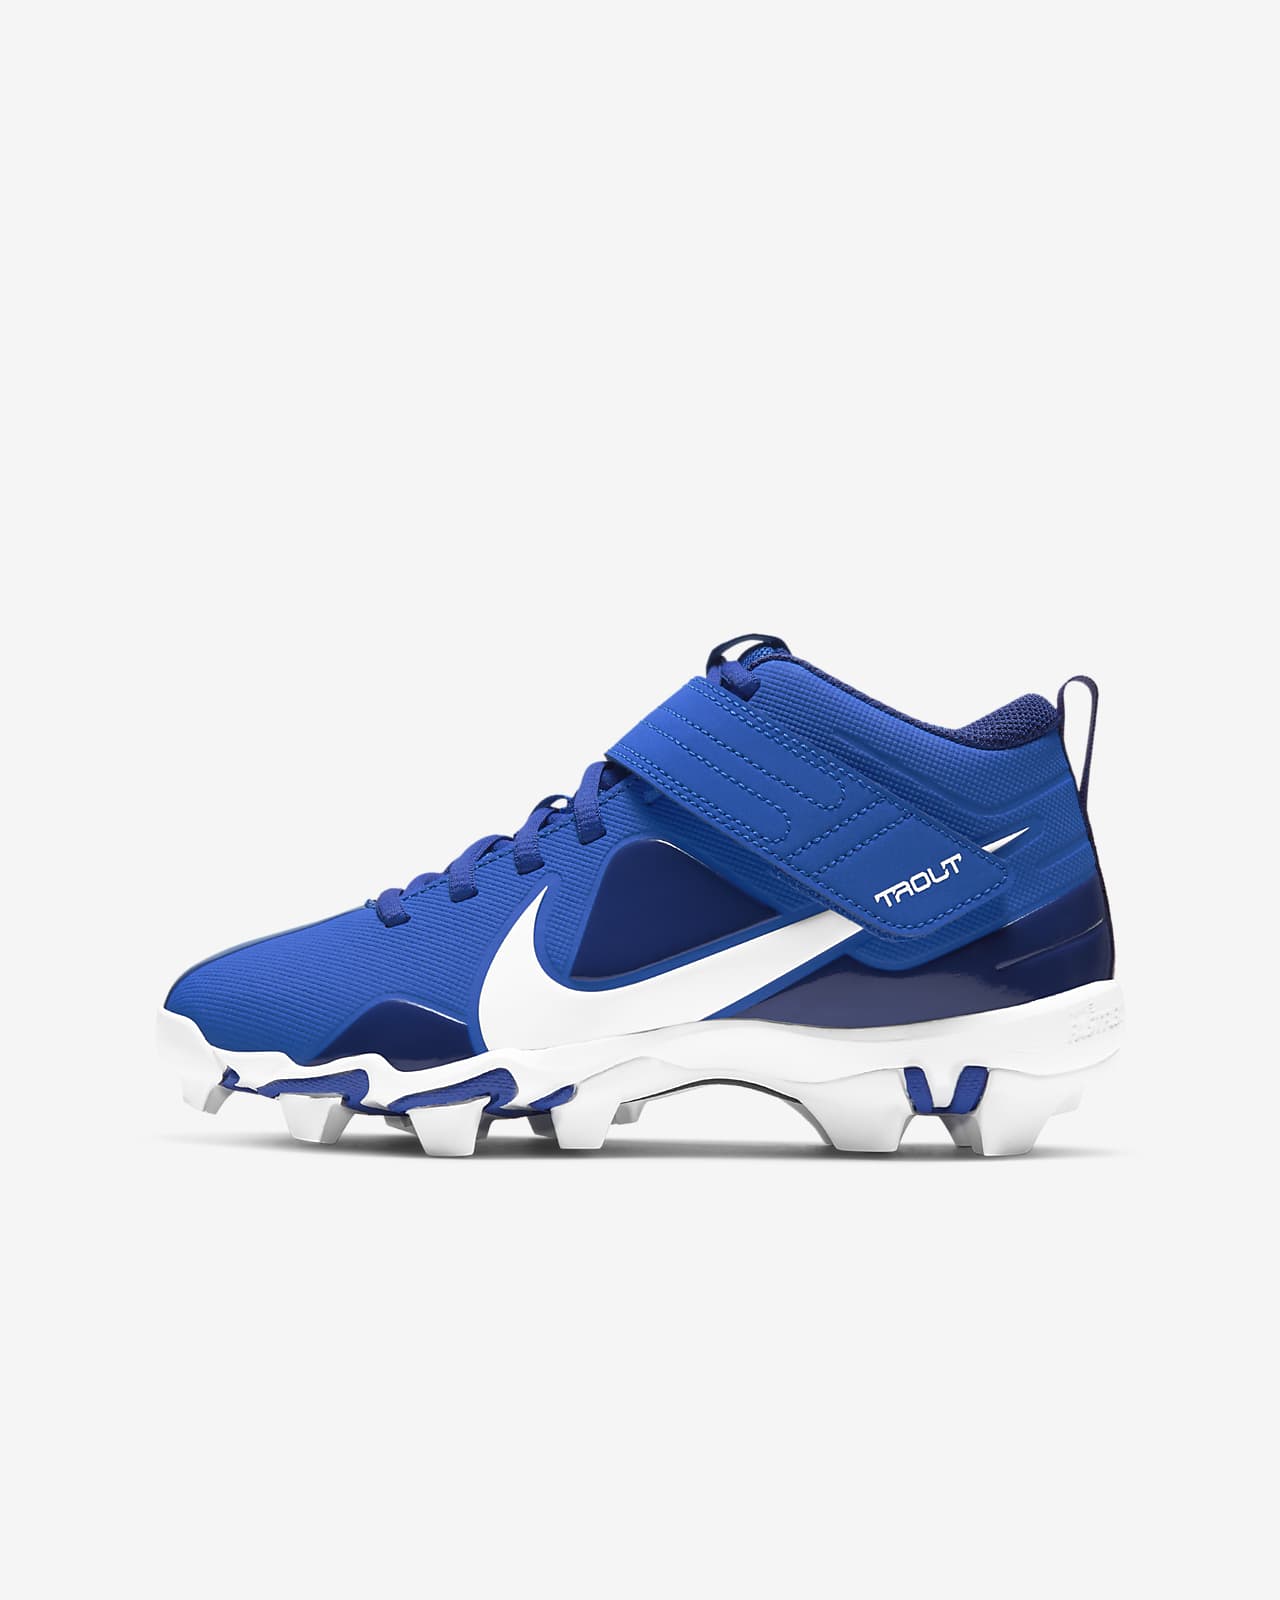 mike trout youth turf shoes